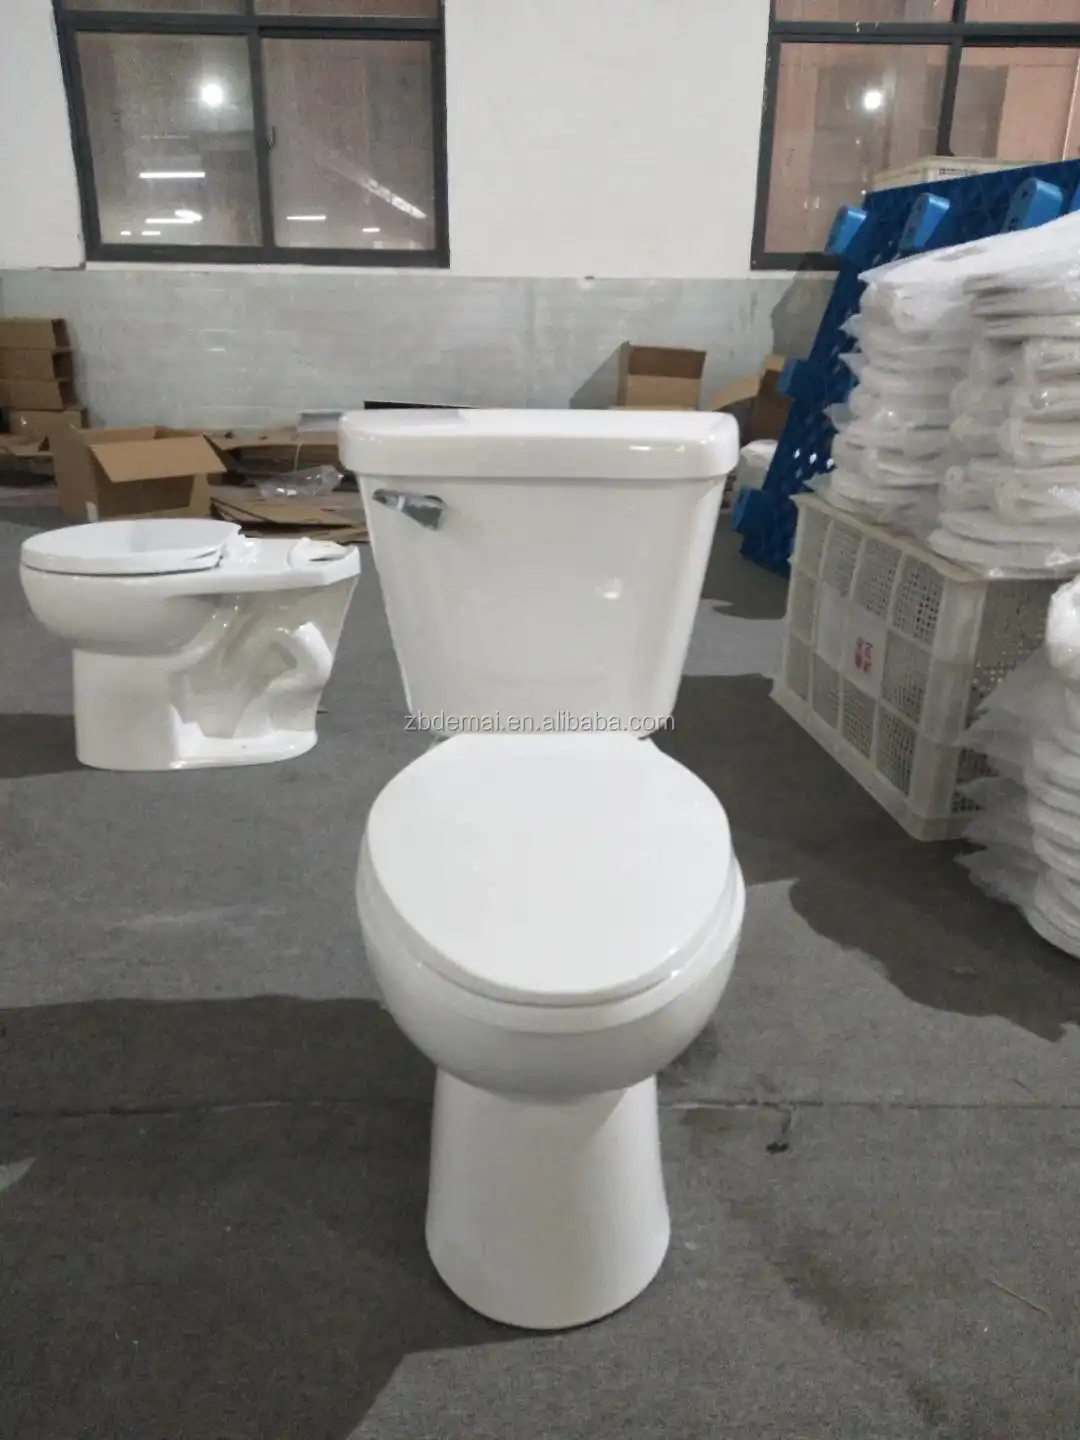 Dmt57.58.59 Quality Two Piece Toilet Bowl And Tank Of S-trap Of Sanitary Ware In Good Price - Buy Quality Two Piece Toilet Set Bowl With Tank S-trap Of Sanitary Ware,Two Toilet